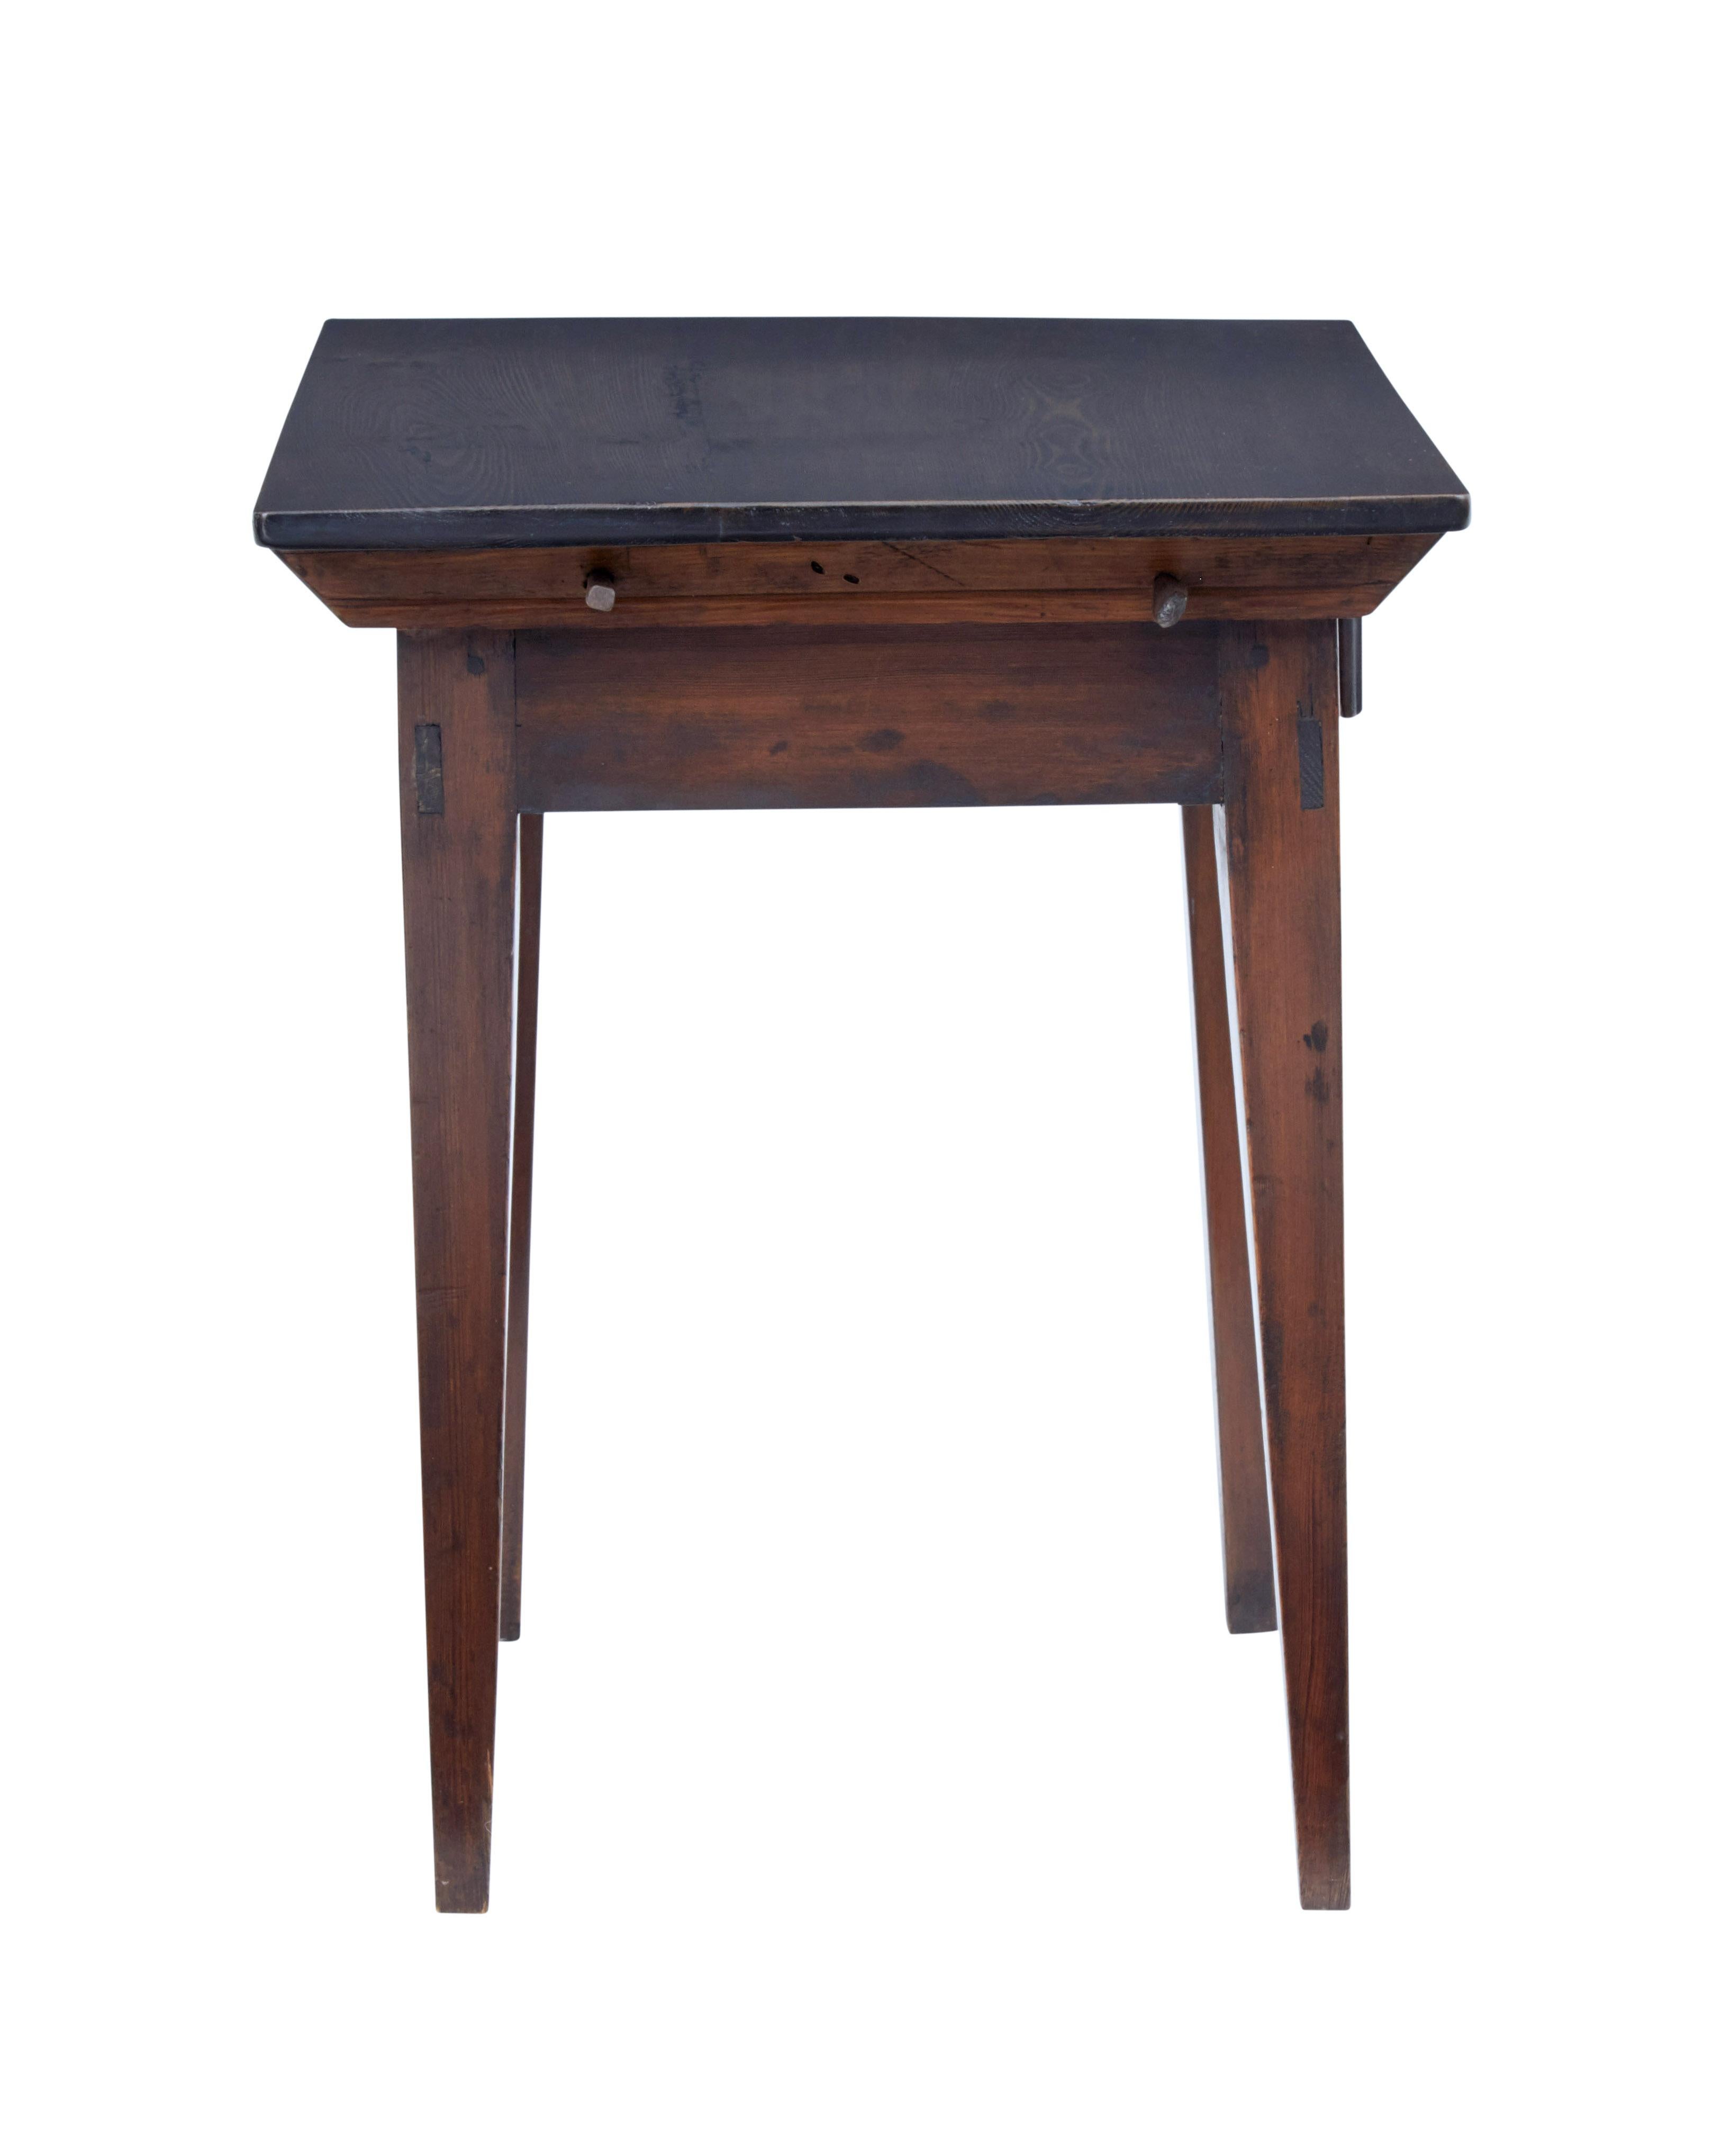 Rustic 19th Century Swedish Pine Stained Side Table